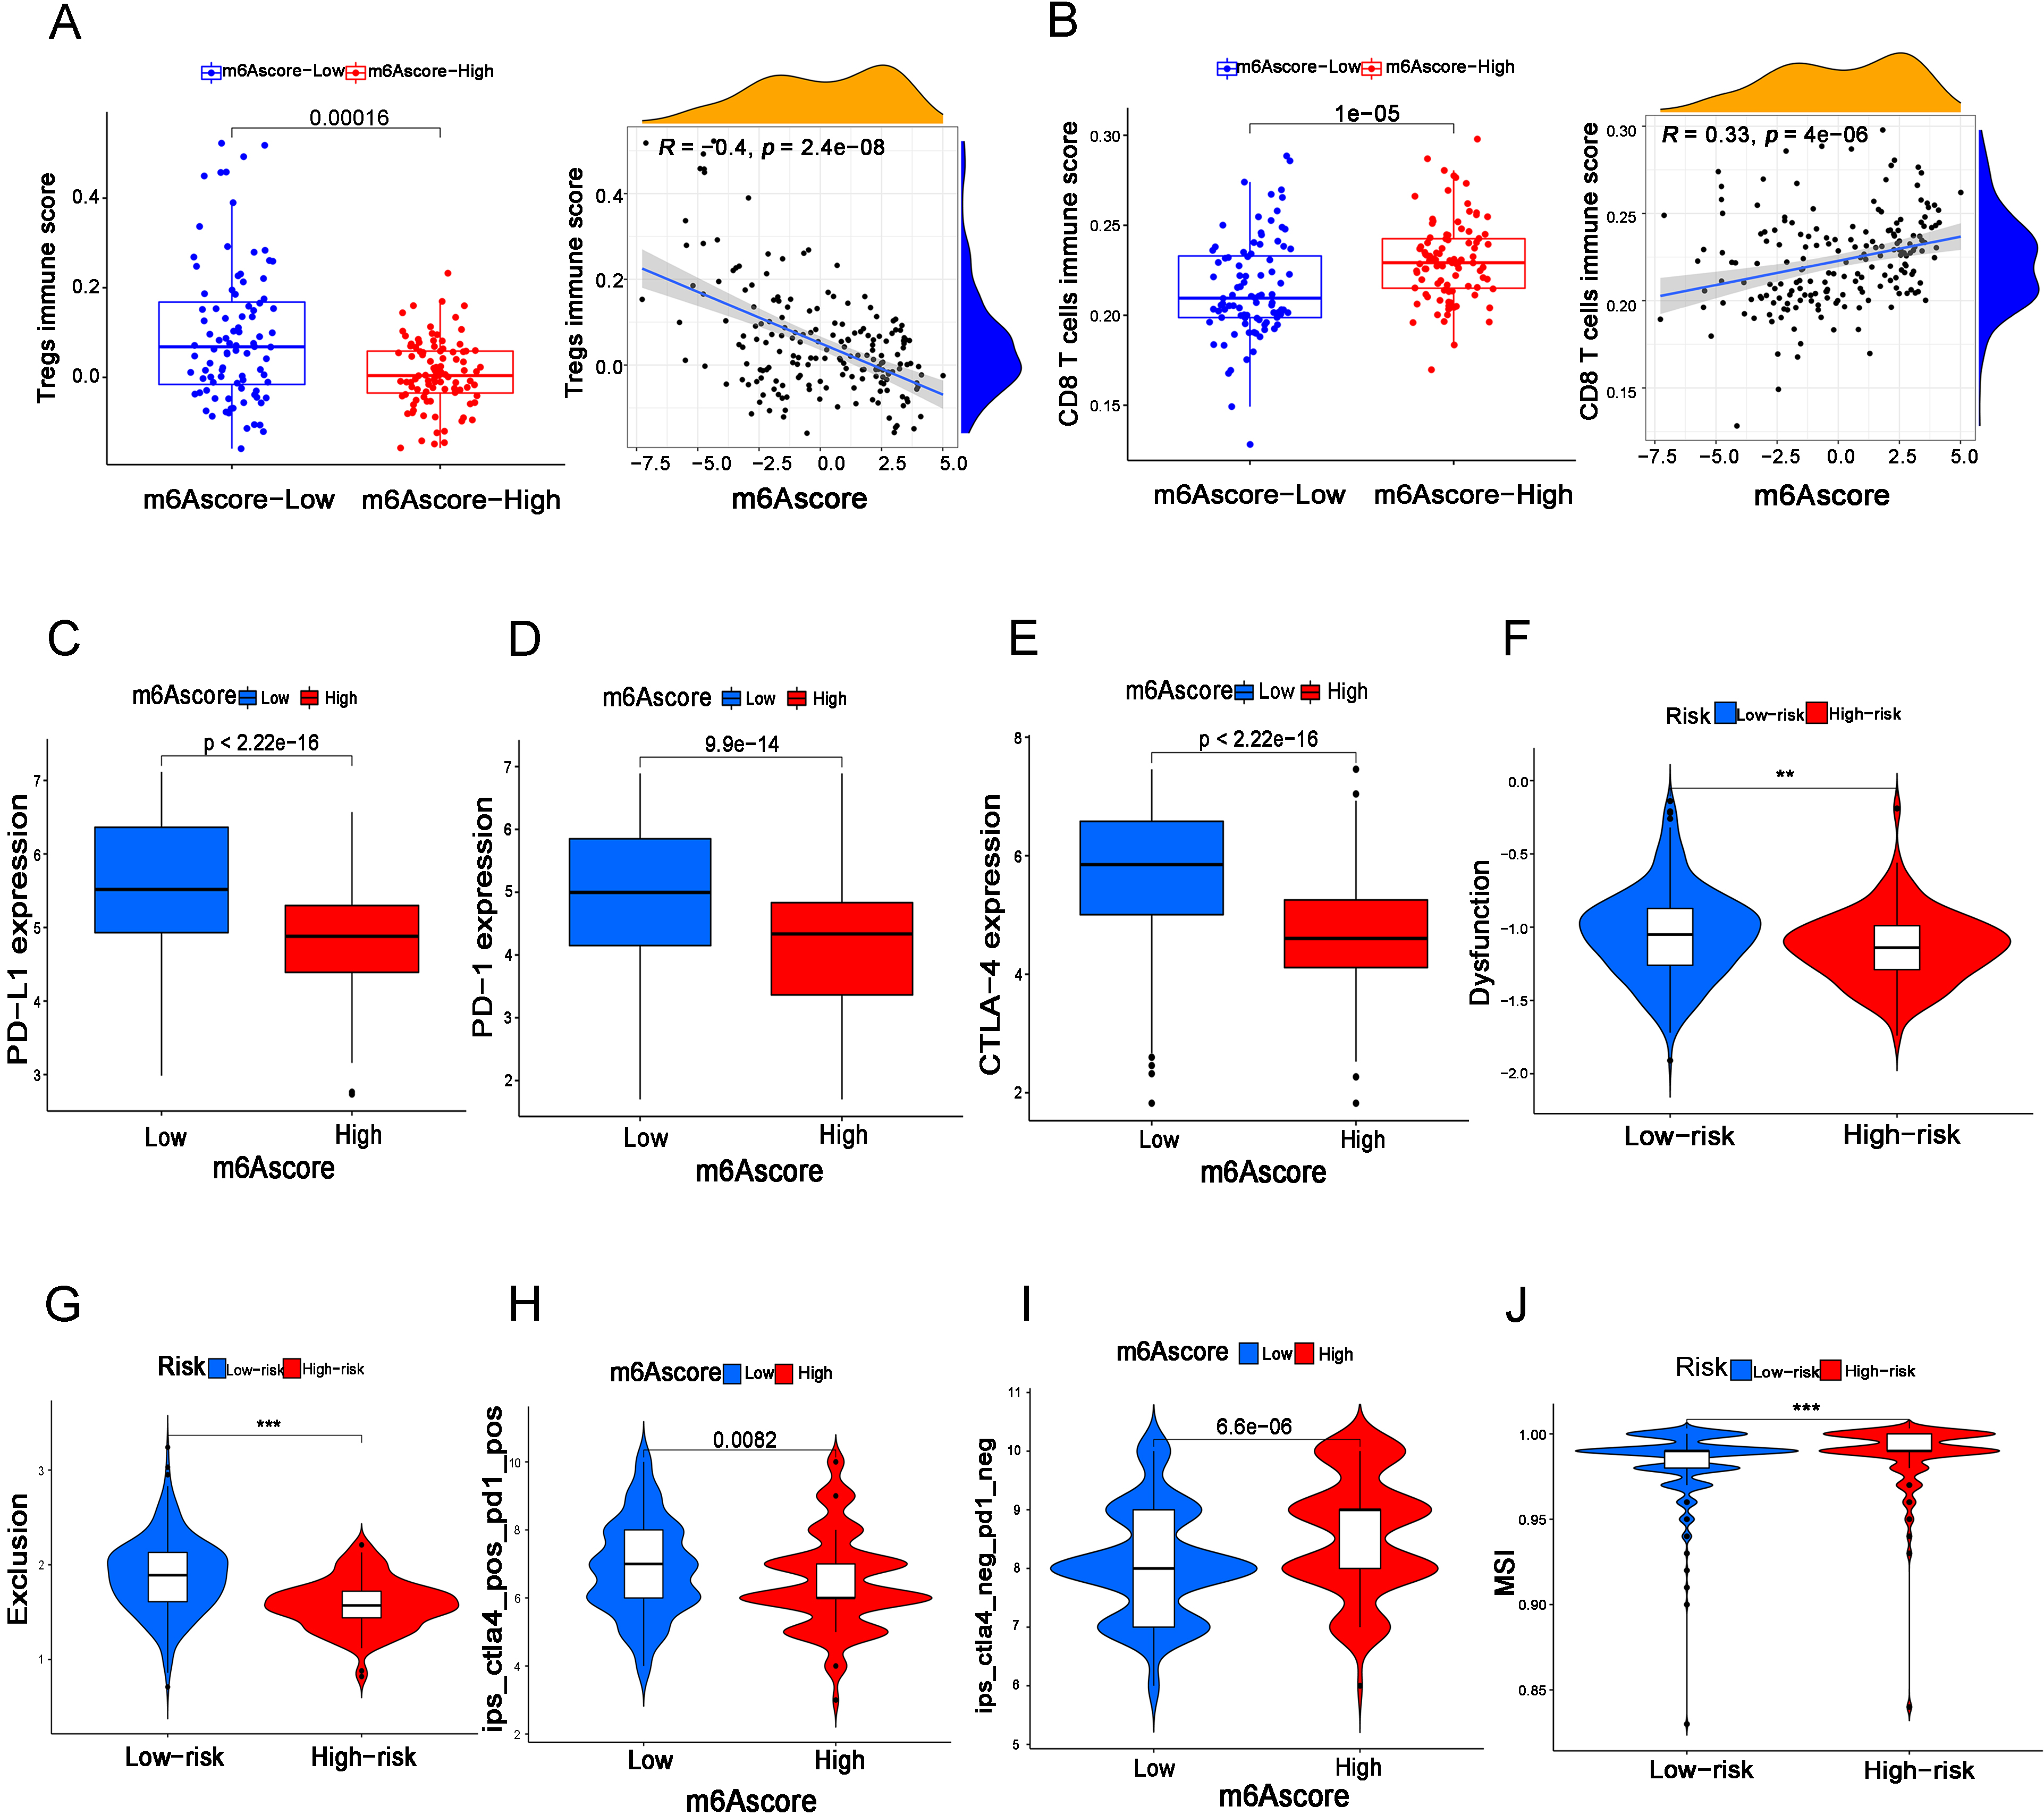 The LS group predicts a higher risk of immune escape in BC patients. (A, B) The immune score of Treg cells (A) and CD8+ T (B) cells in the m6A score groups and correlations between immune score and m6A score. (C–E) The expression of PD-L1, PD-1 and CTLA4 between the HS and LS groups. (F–I) The immune dysfunction score (F), immune exclusion score (G), PD-1 and PD-L1 immunotherapy effect score (H), and negative PD-1 and PD-L1 immunotherapy effect score (I) between the HS and LS groups. (J) The MSI status between the HS and LS groups.